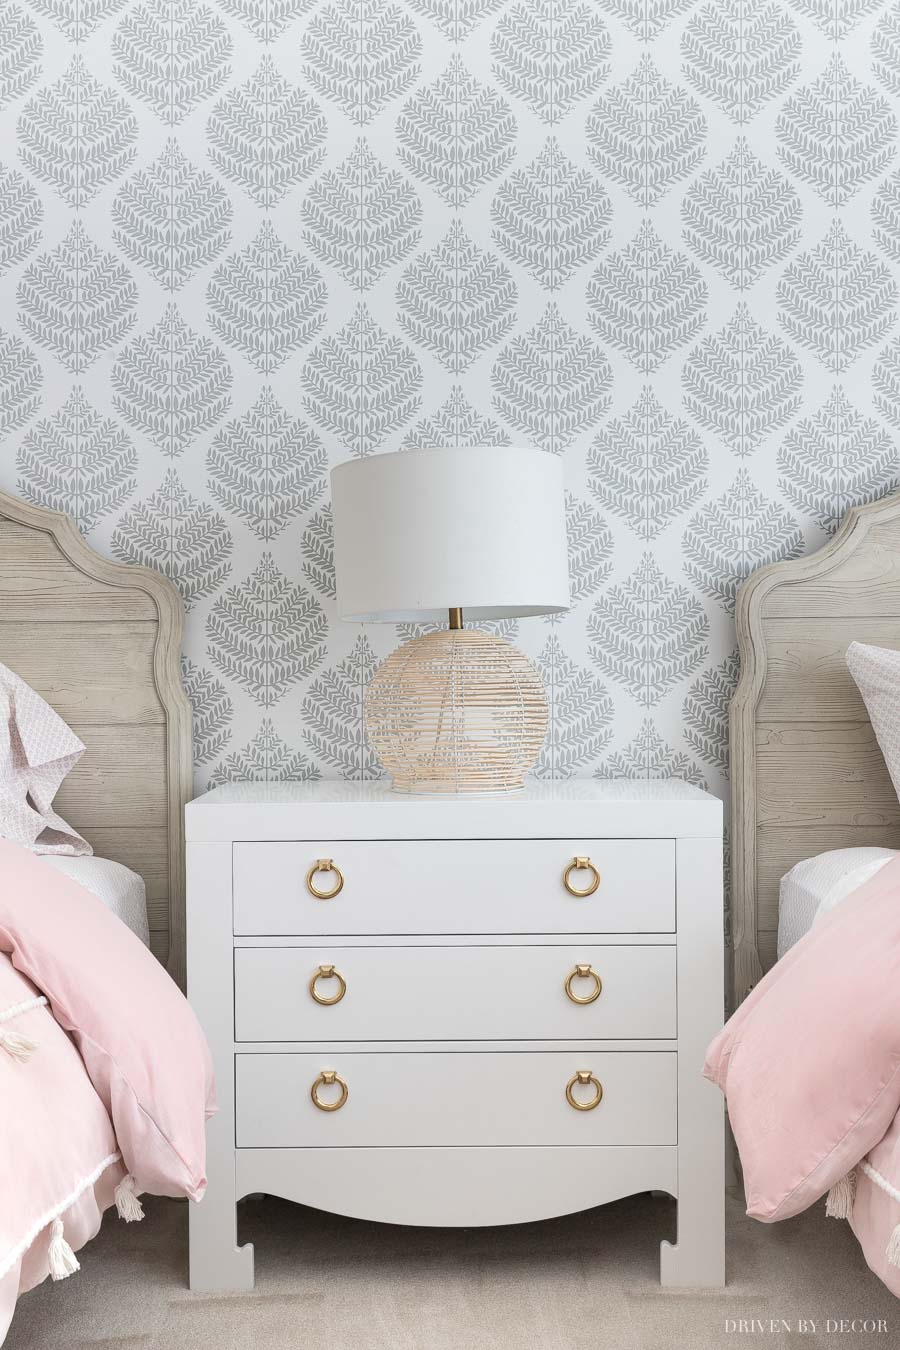 This small white chest is perfect or a bedroom nightstand